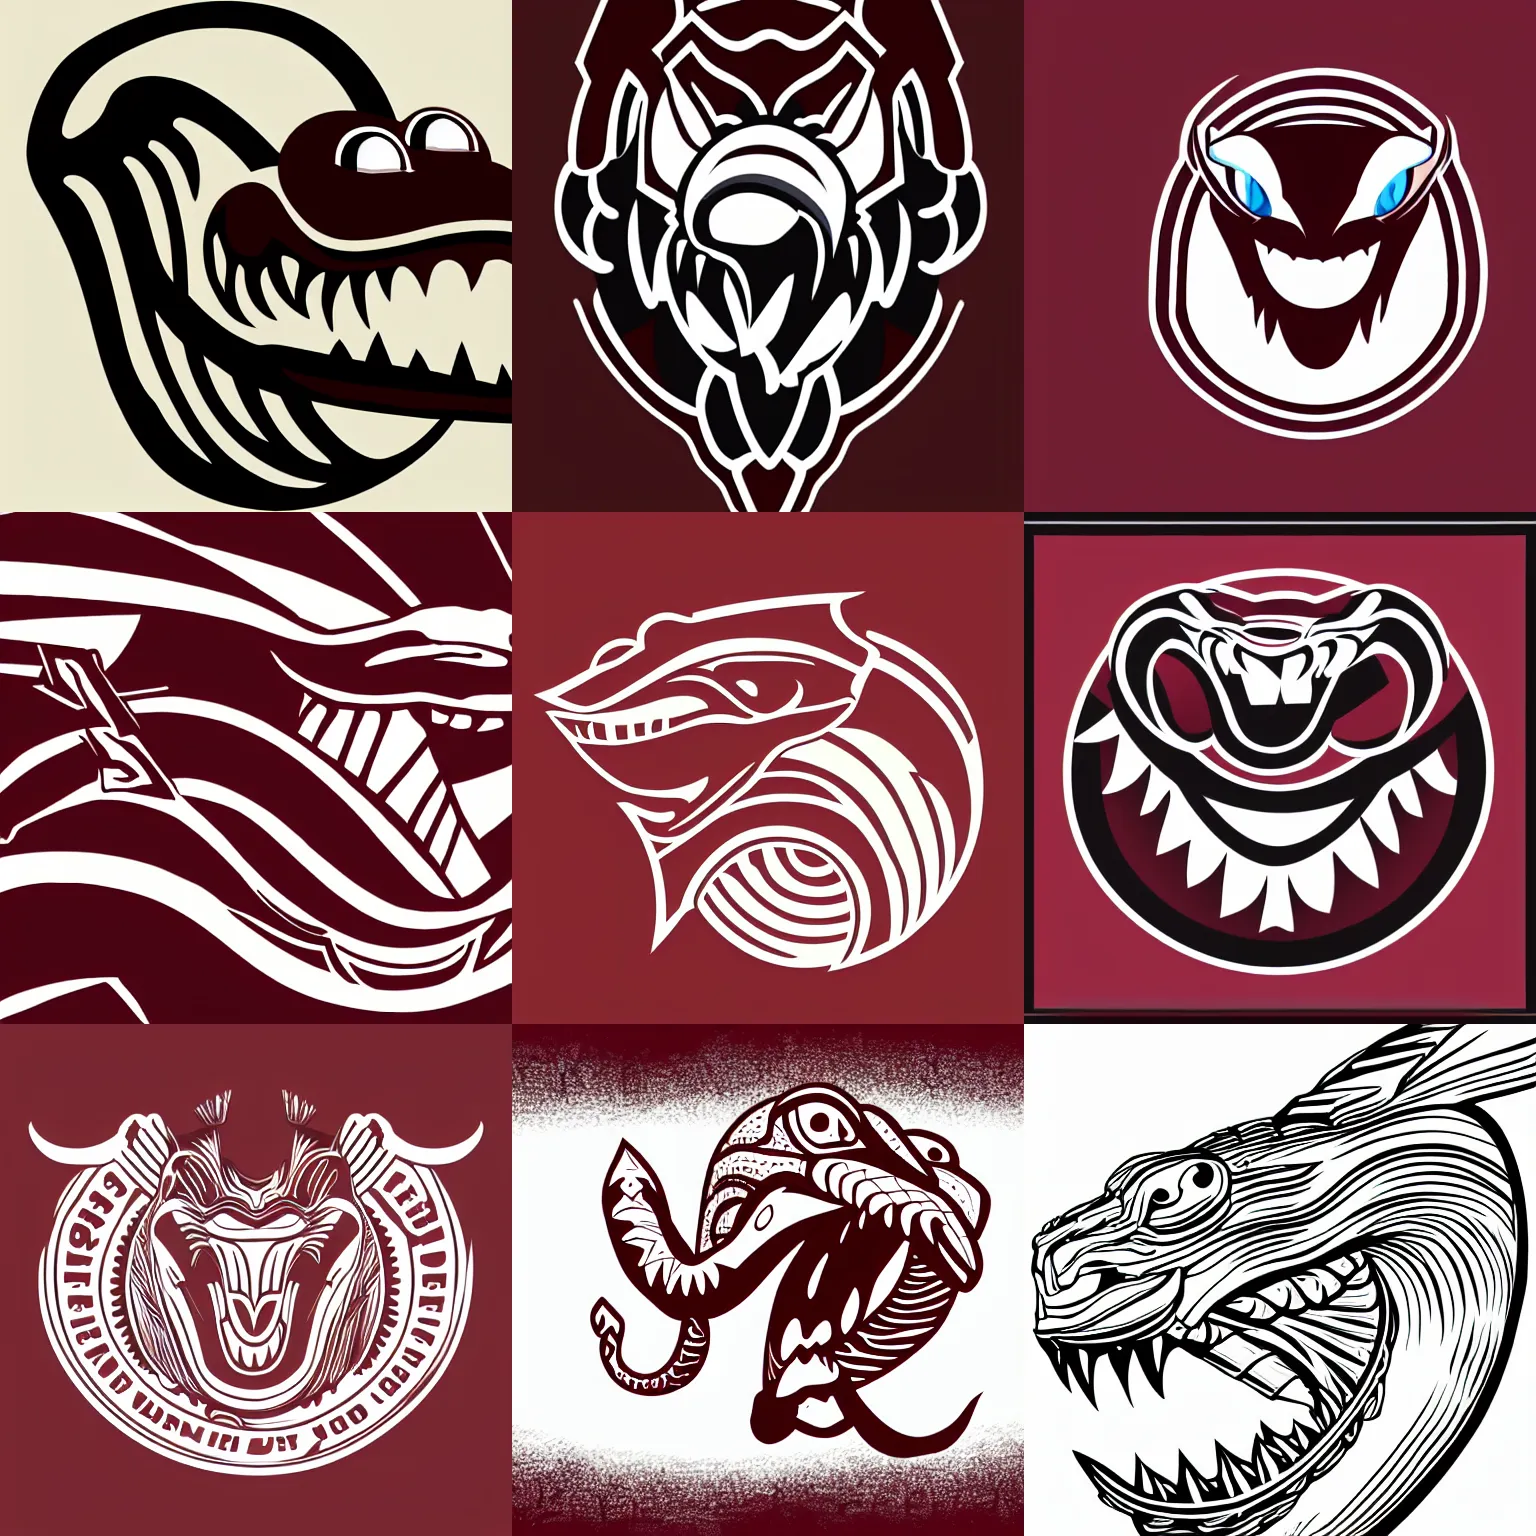 Prompt: Cobra head mascot facing right, maroon and white, graphic design, line art, perfect lines, no text